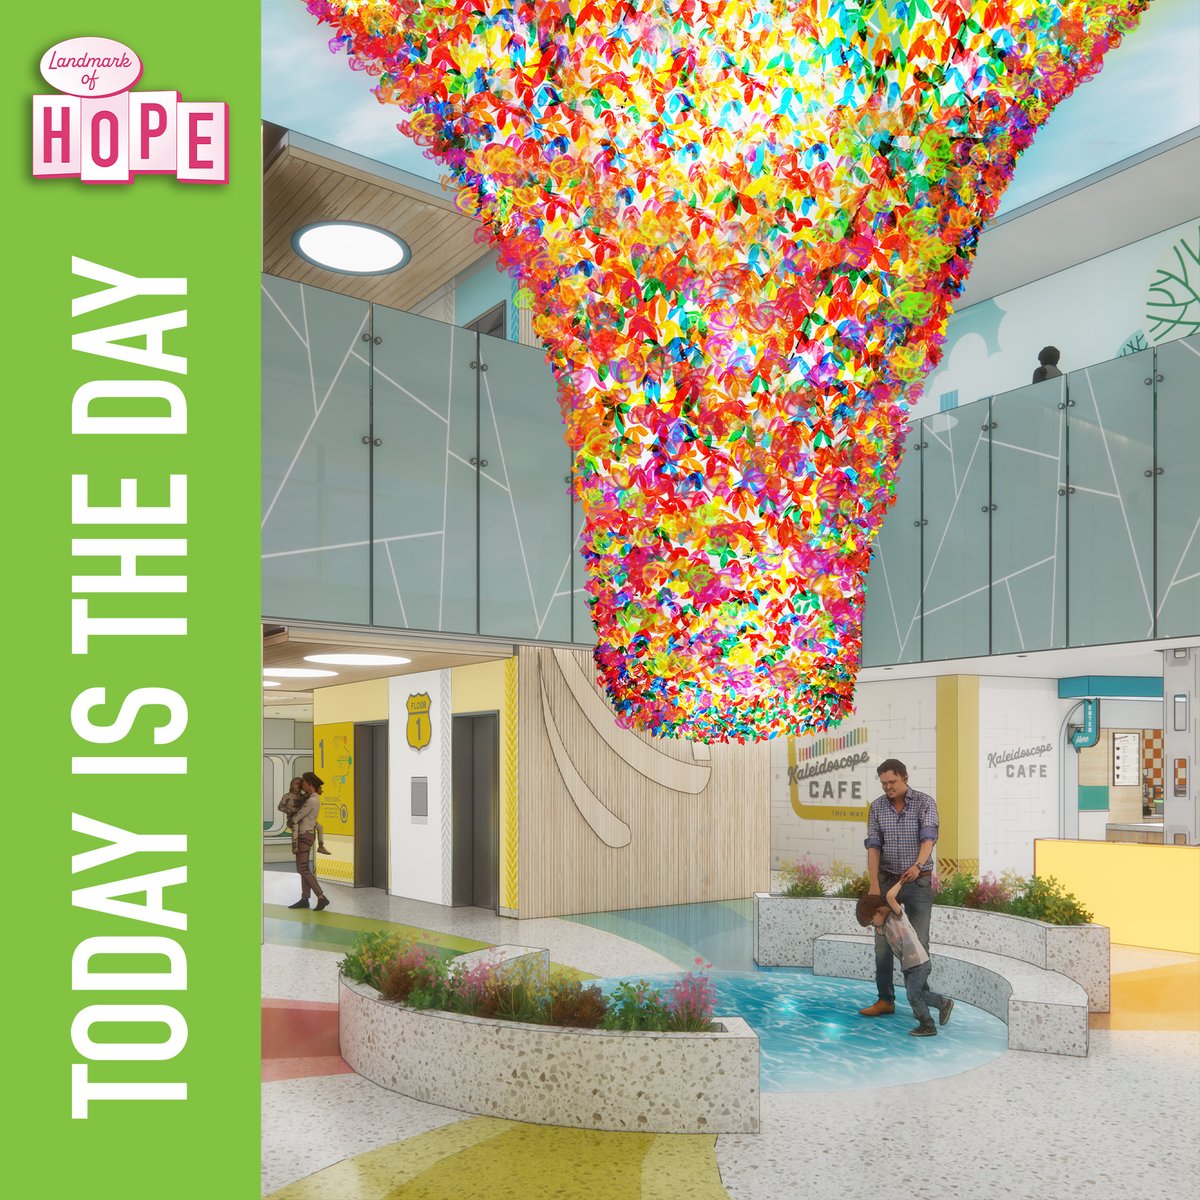 🎉 Today's the day! 🎉 Join us from 12-4 PM for our Landmark of Hope Groundbreaking Celebration! We're excited to share this special moment with you. Enjoy food trucks, live music, games, and more. See you soon! #LandmarkOfHope #Groundbreaking #Celebration #BethanyChildrens